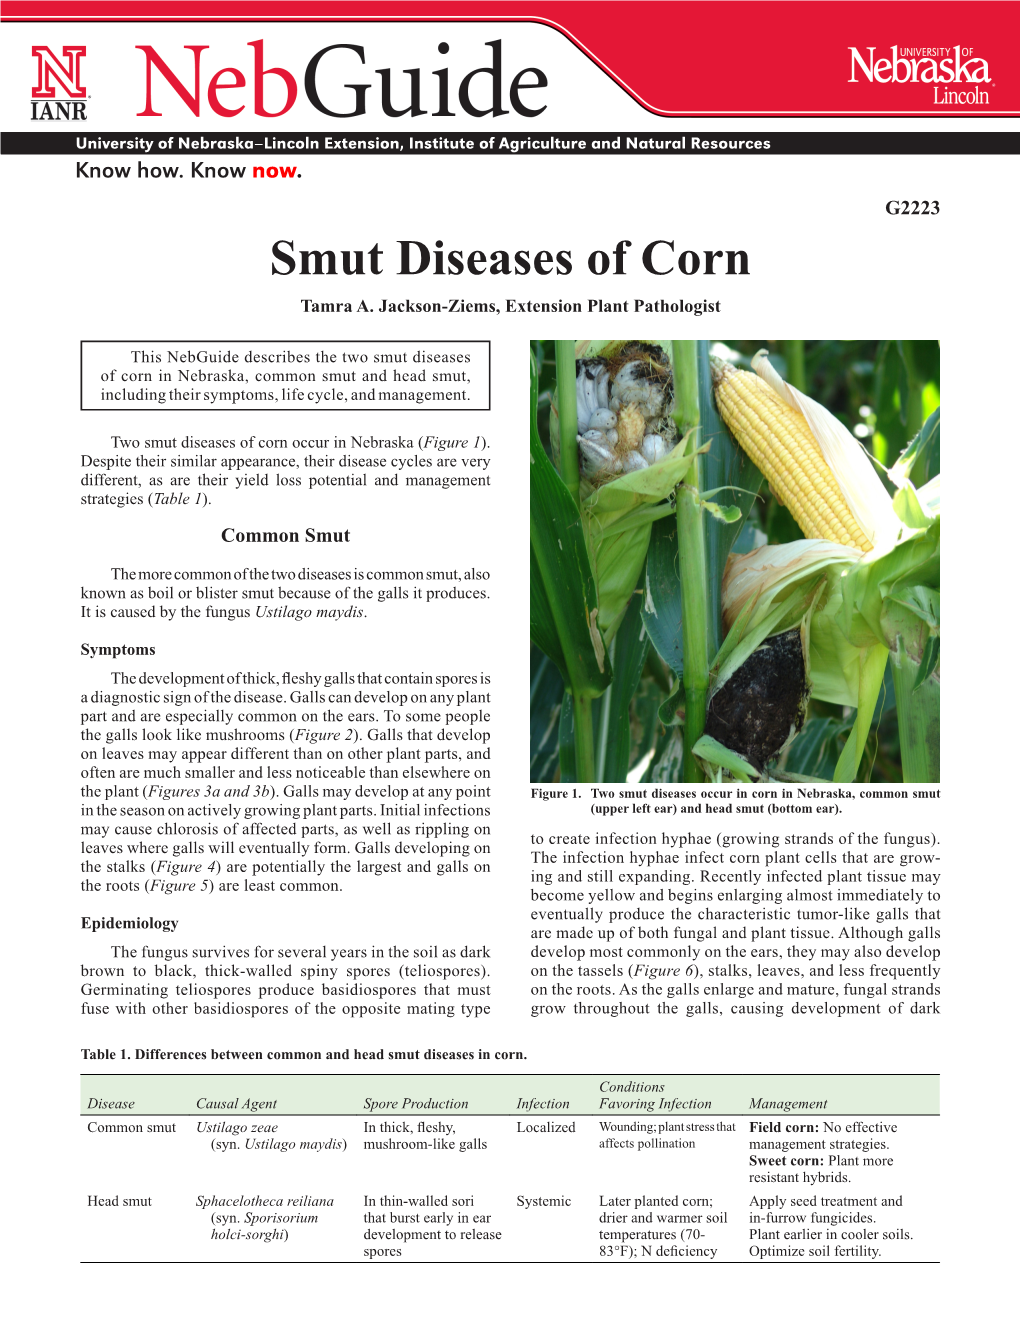 Smut Diseases of Corn Tamra A